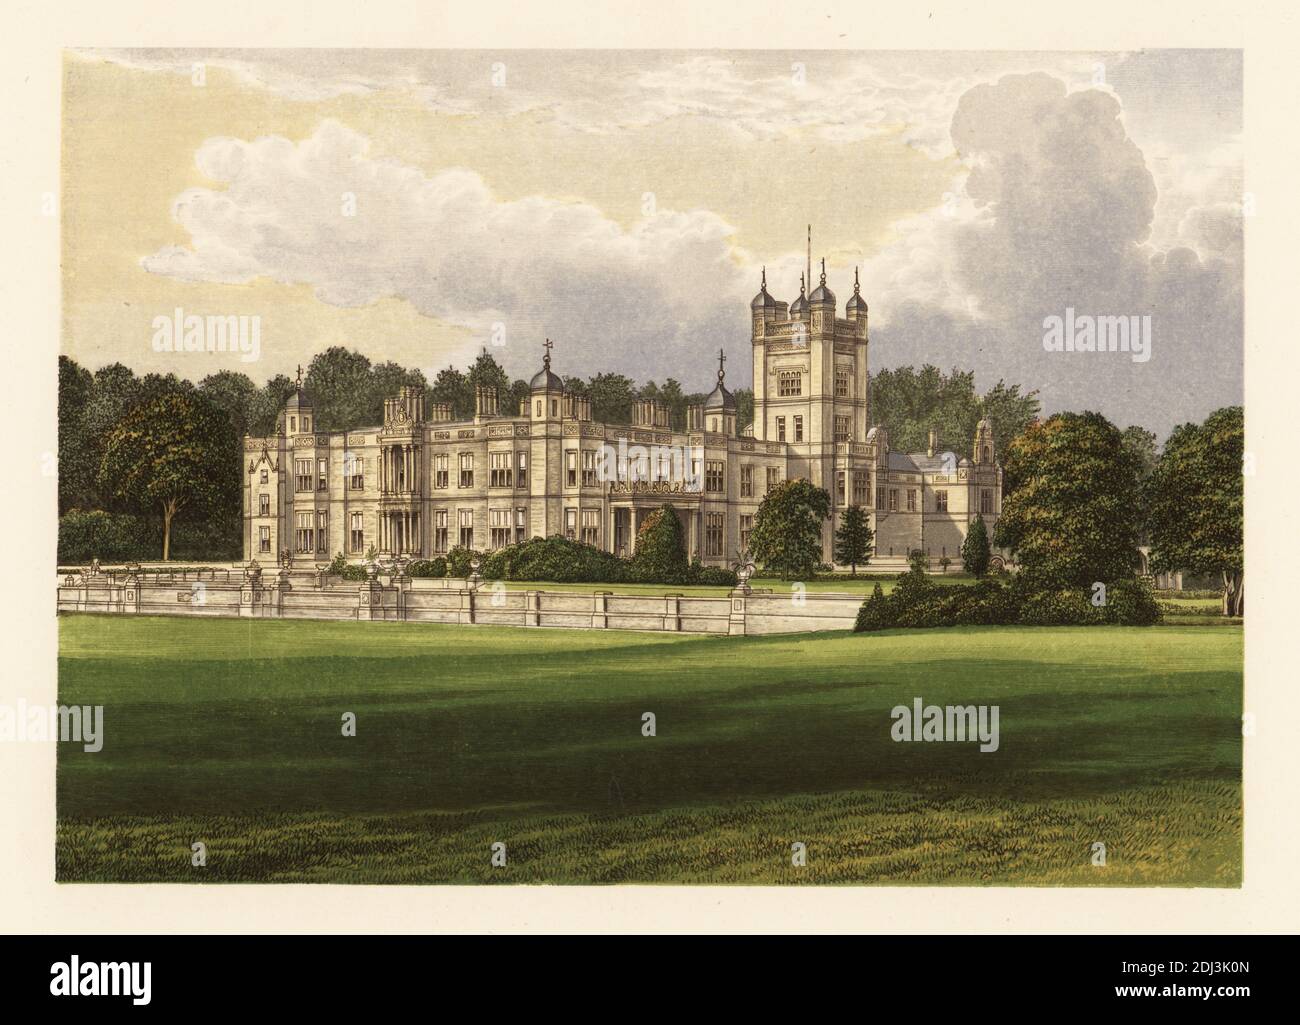 Underley Hall, Cumbria, England. Jacobean-style manor designed by architect George Webster built in 1825 for Alexander Nowell, with additional wing designed by Edward Graham Paley and Hubert Austin for Thomas Taylour, MP, in 1874. Colour woodblock by Benjamin Fawcett in the Baxter process of an illustration by Alexander Francis Lydon from Reverend Francis Orpen Morris’s Picturesque Views of the Seats of Noblemen and Gentlemen of Great Britain and Ireland, William Mackenzie, London, 1880. Stock Photo